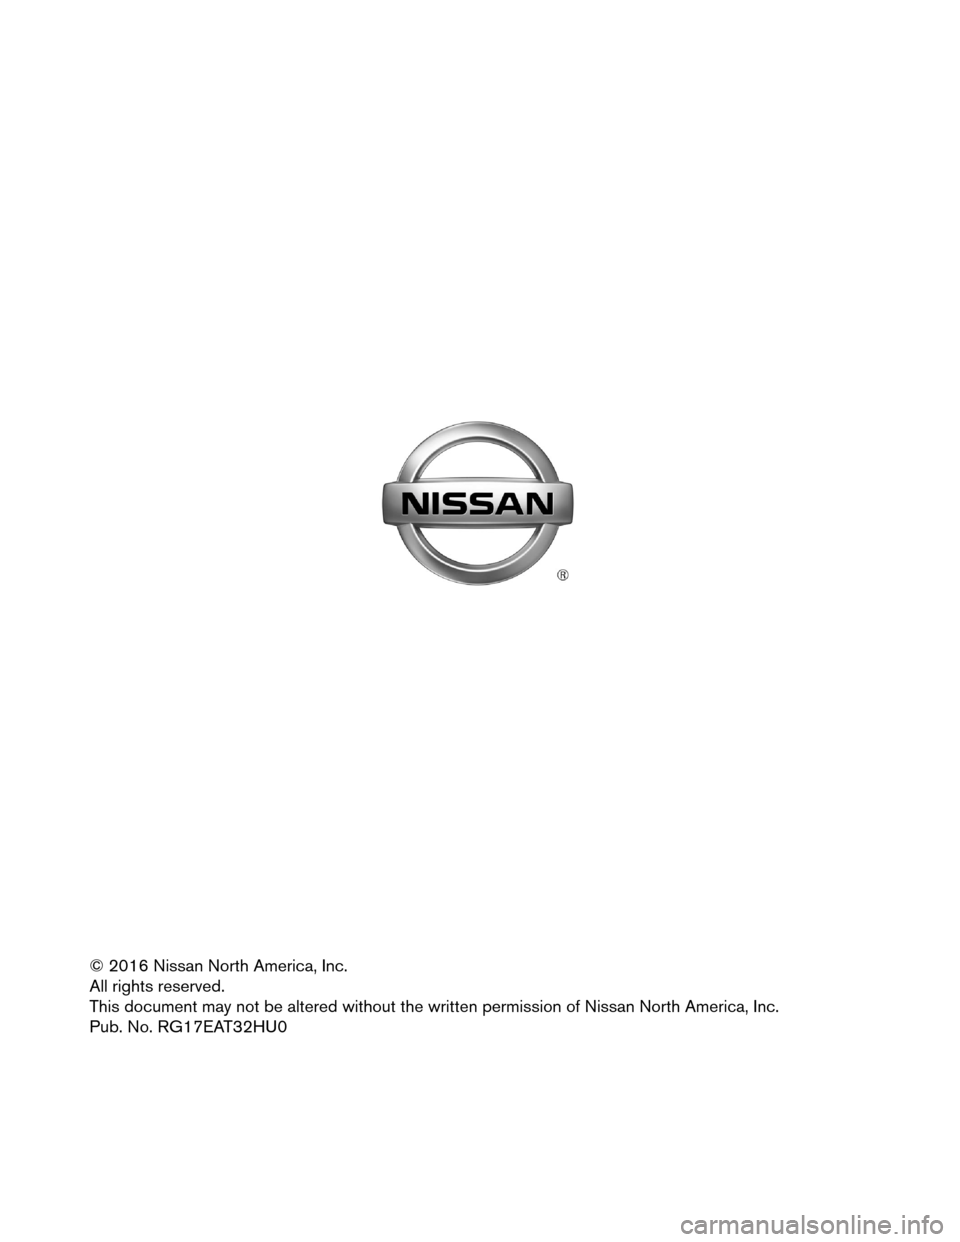 NISSAN ROGUE HYBRID 2017 2.G Roadside Assistance Guide © 2016 Nissan North America, Inc.
All
rights reserved.
This document may not be altered without the written permission of Nissan North America, Inc.
Pub. No. RG17EAT32HU0  